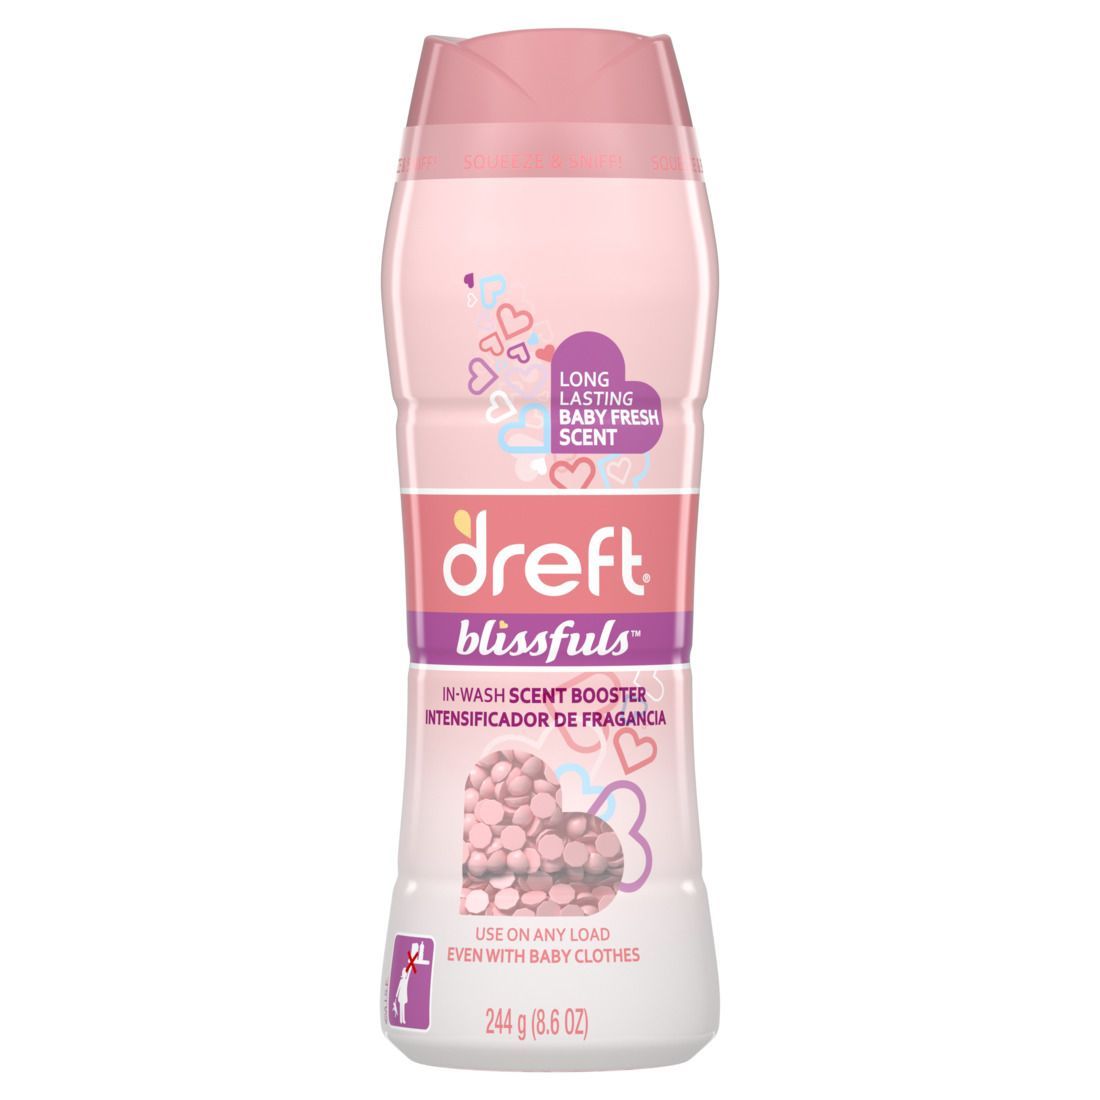 Dreft - Blissfuls In-Wash Scent Booster 8.6oz, Baby Fresh Scent - Case of 4